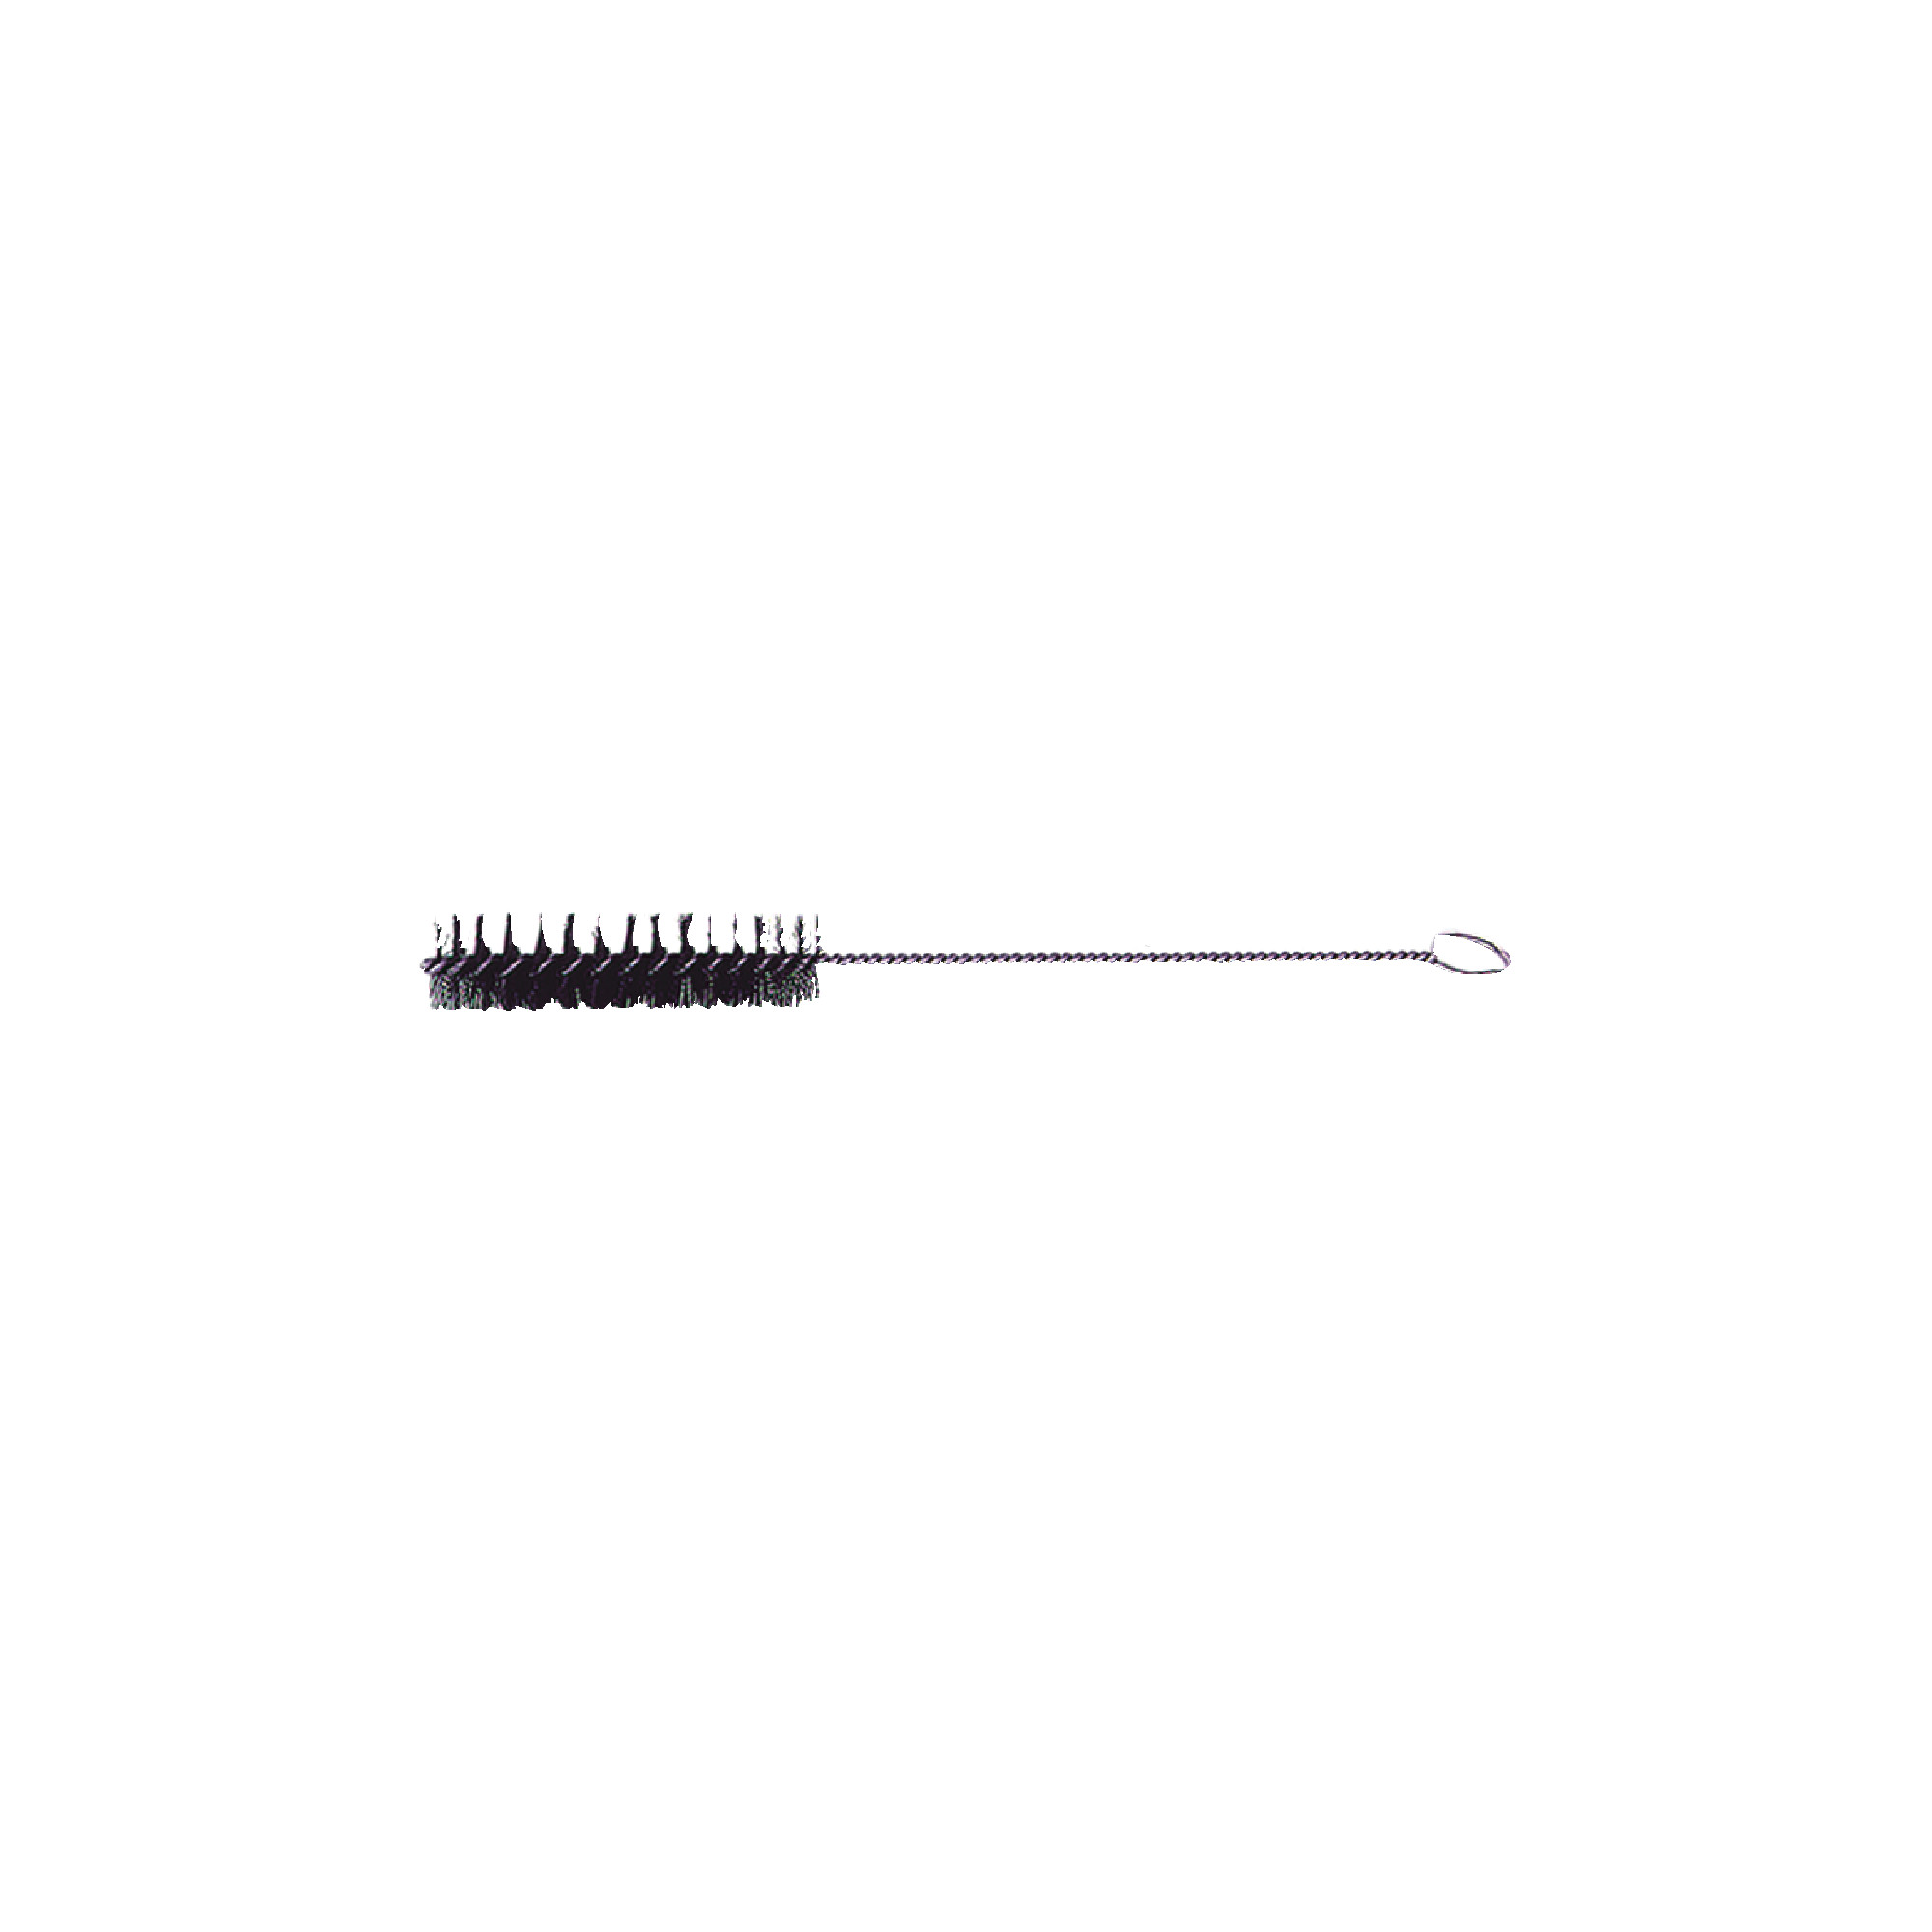 Straight black nylon fill brushes with loop handle